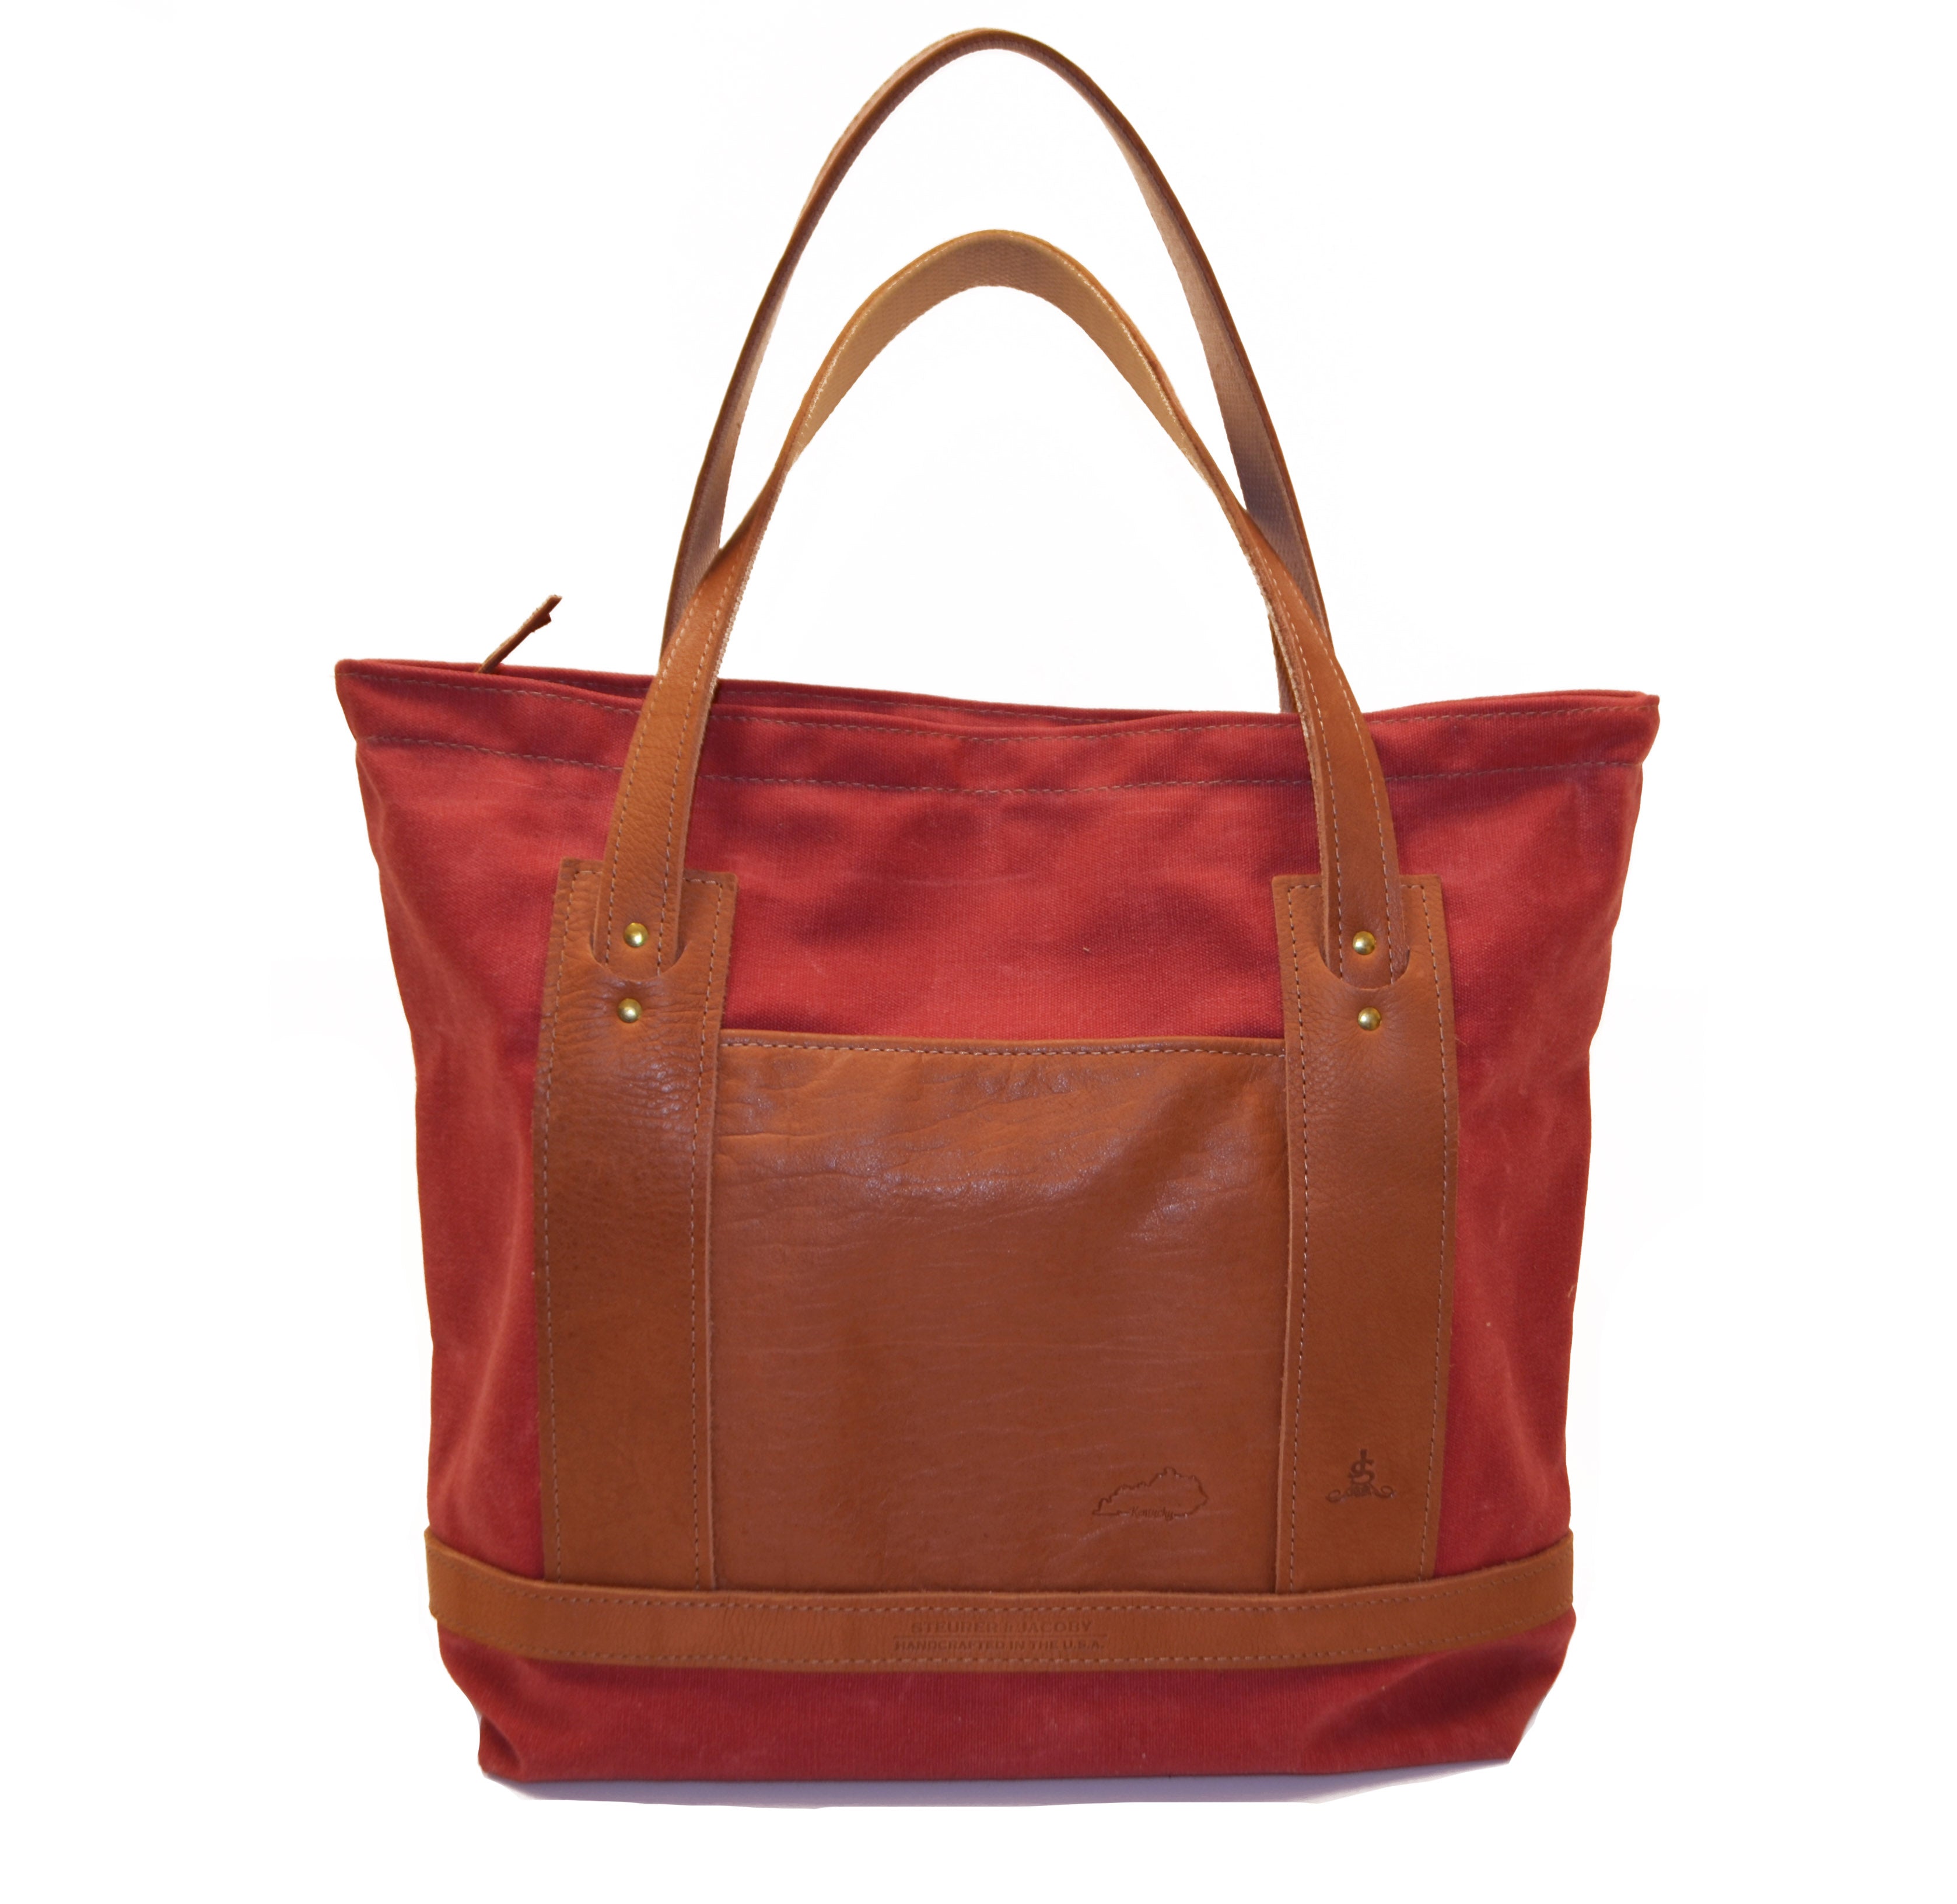 Tote Bag- Nantucket Red Waxed Cotton Duck Canvas with Chestnut Leather